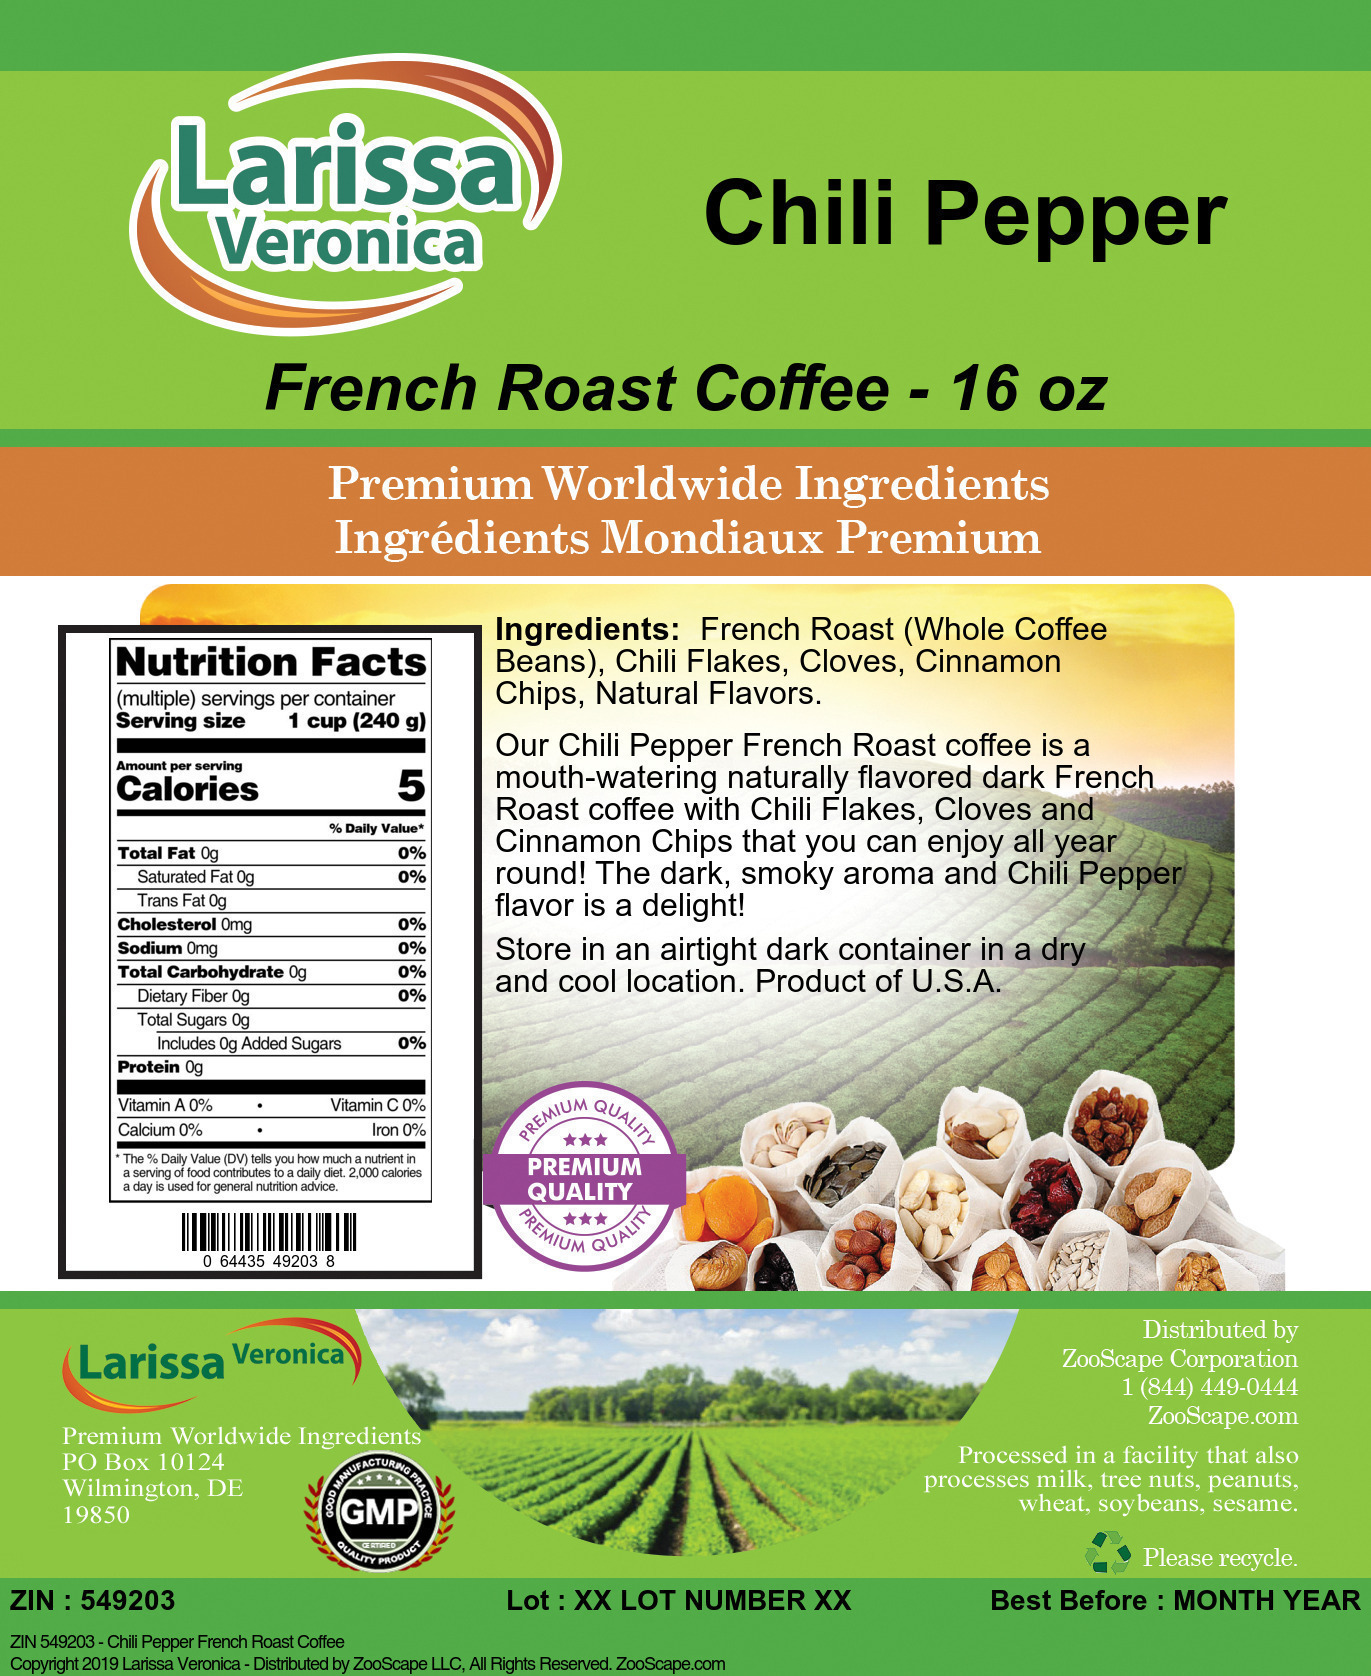 Chili Pepper French Roast Coffee - Label